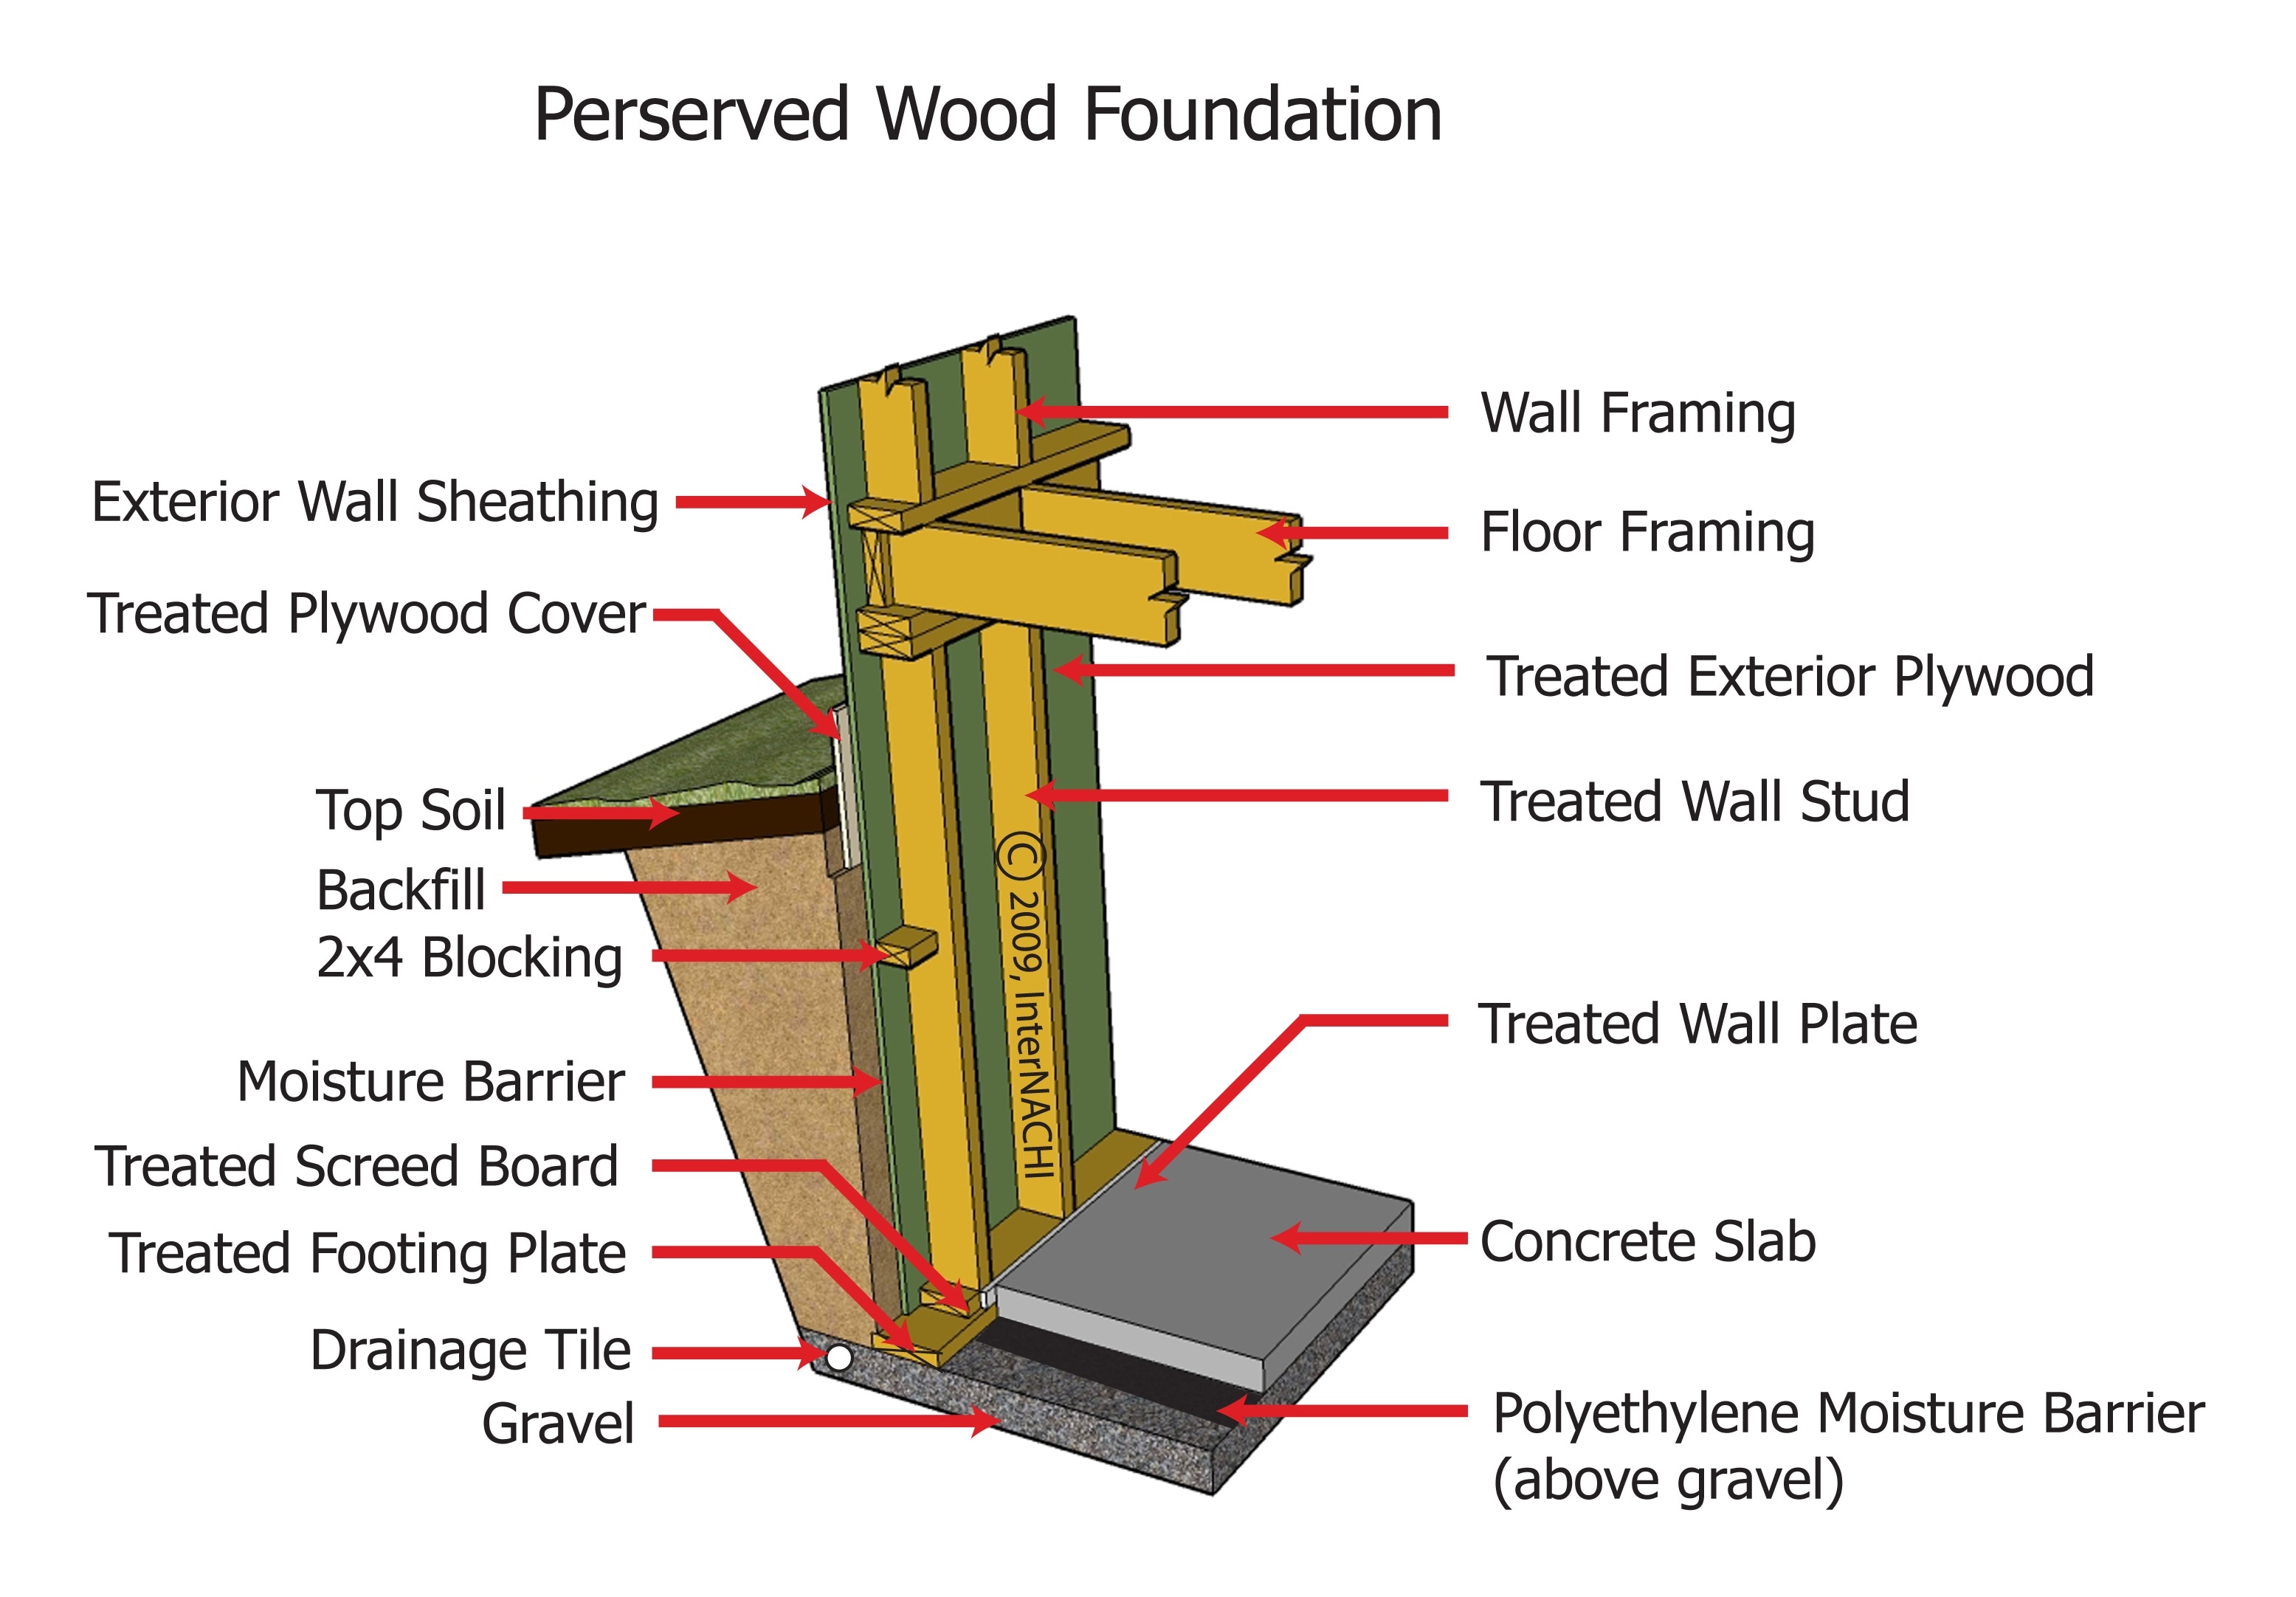 Preserved wood foundation.